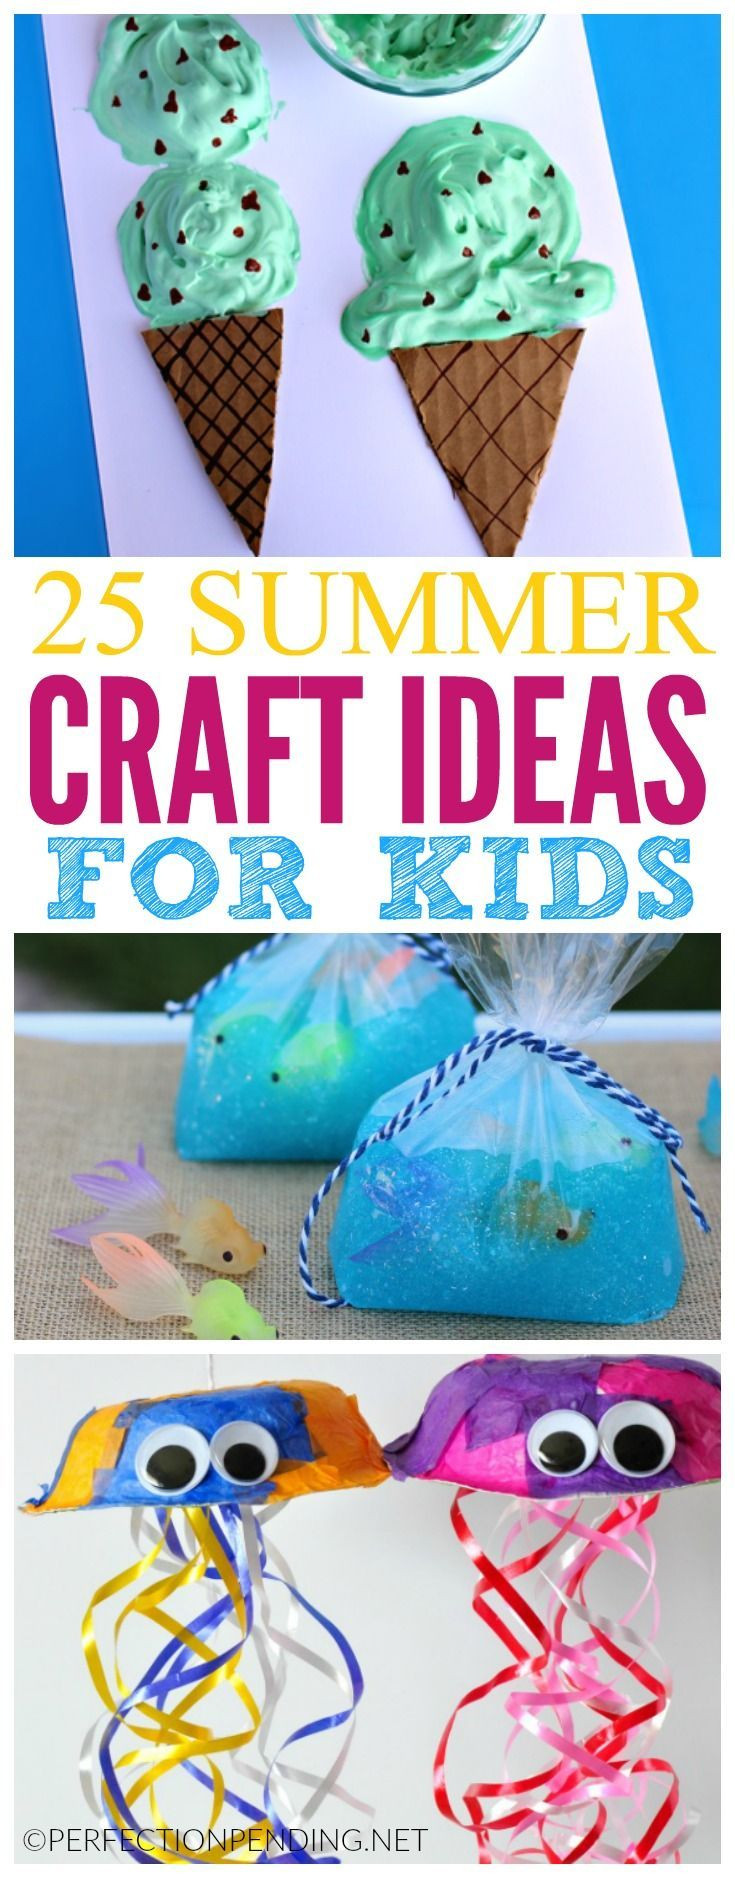 Summer Art And Craft Ideas For Kids
 1474 best Spring & Summer Kids Crafts & Activities images